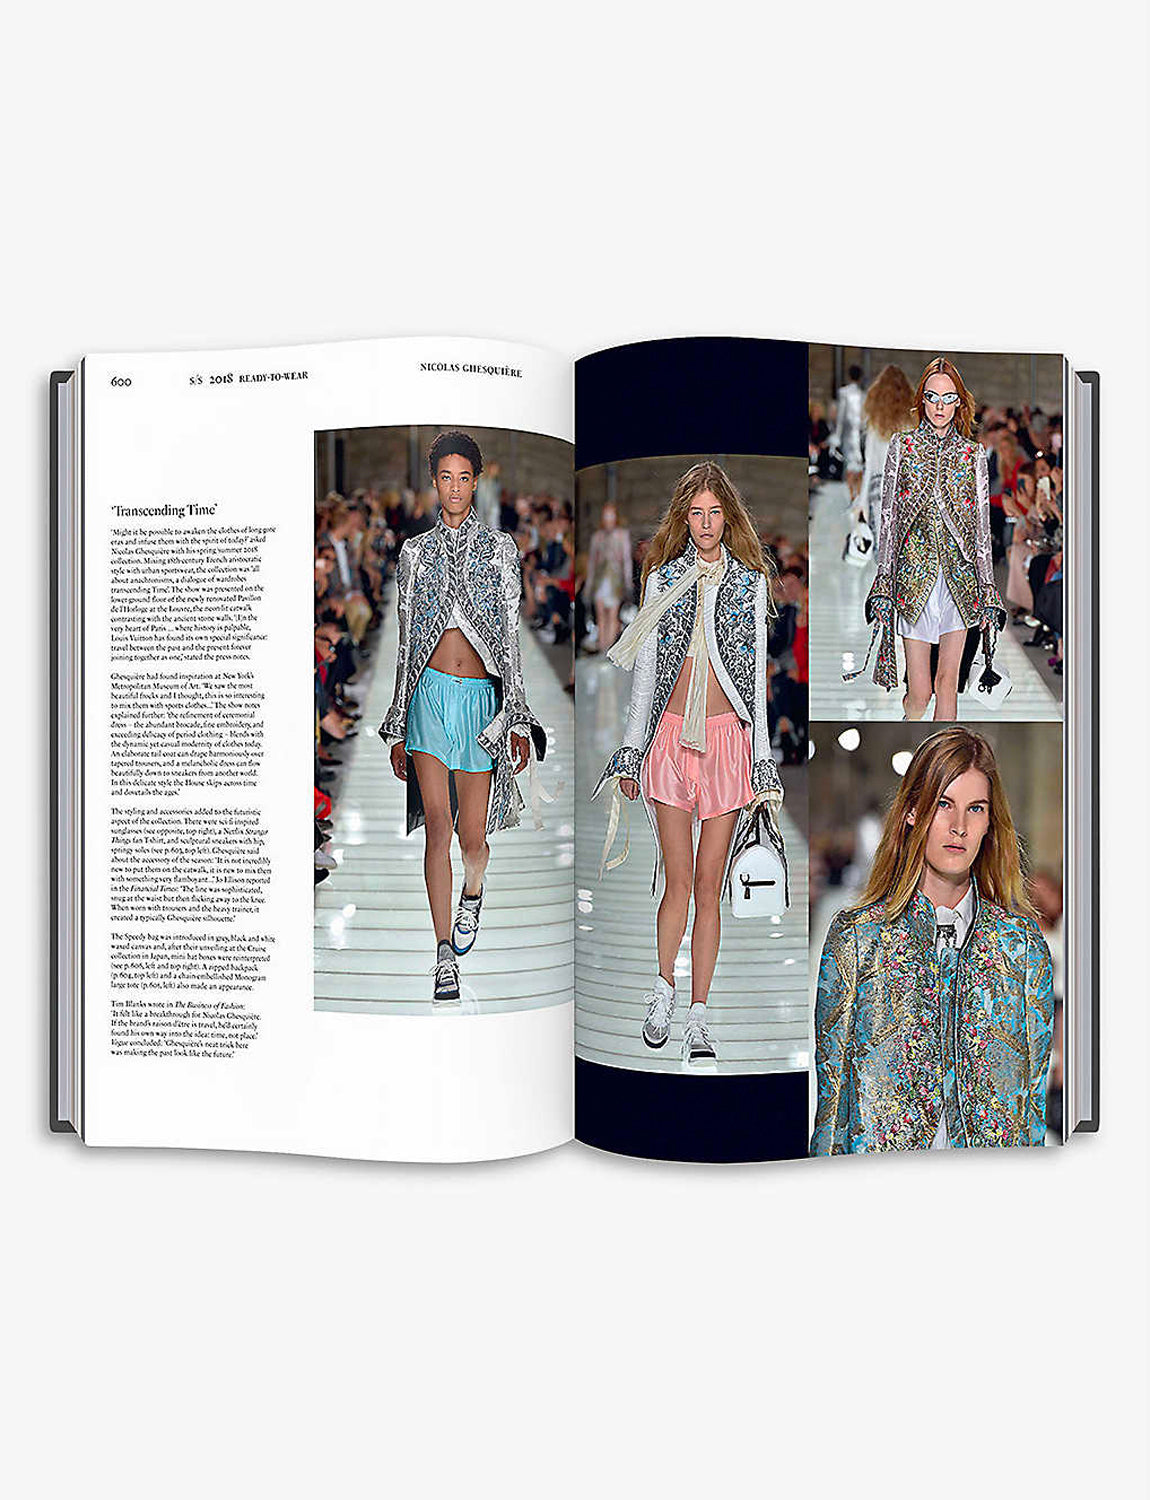 Louis Vuitton: The Complete Fashion Collections (Catwalk)